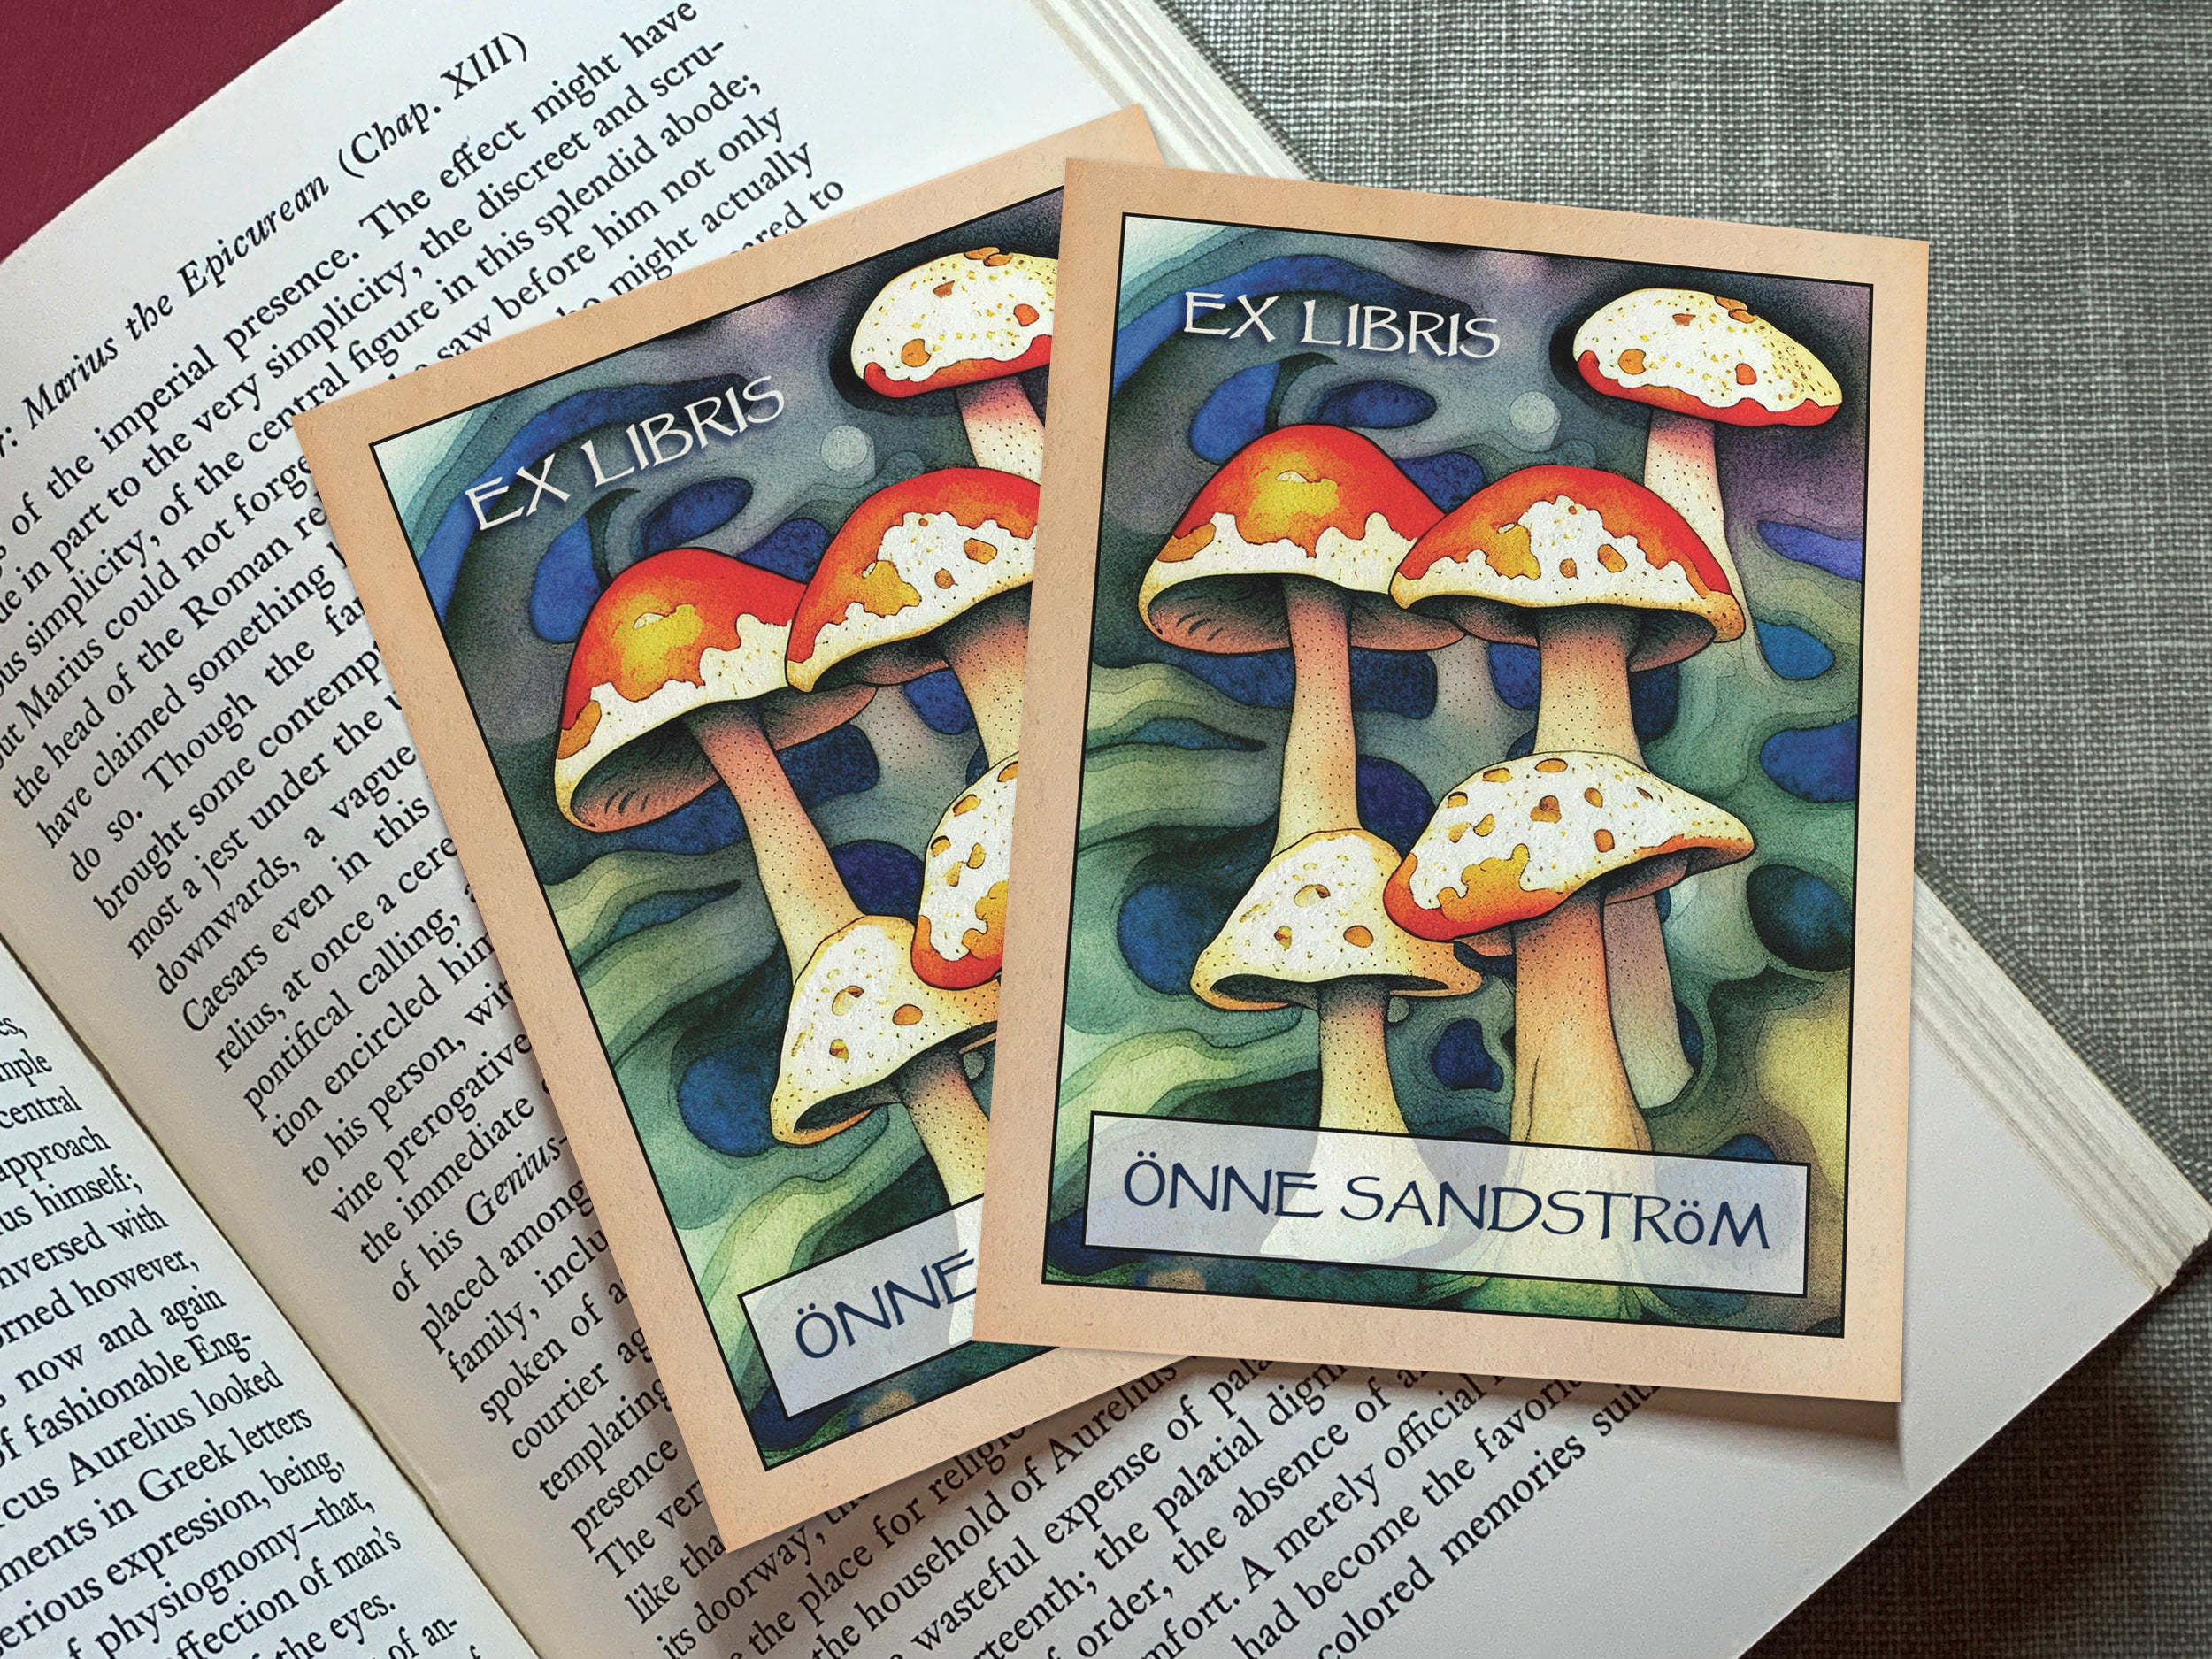 Death Cap, Personalized Ex-Libris Bookplates, Crafted on Traditional Gummed Paper, 3in x 4in, Set of 30